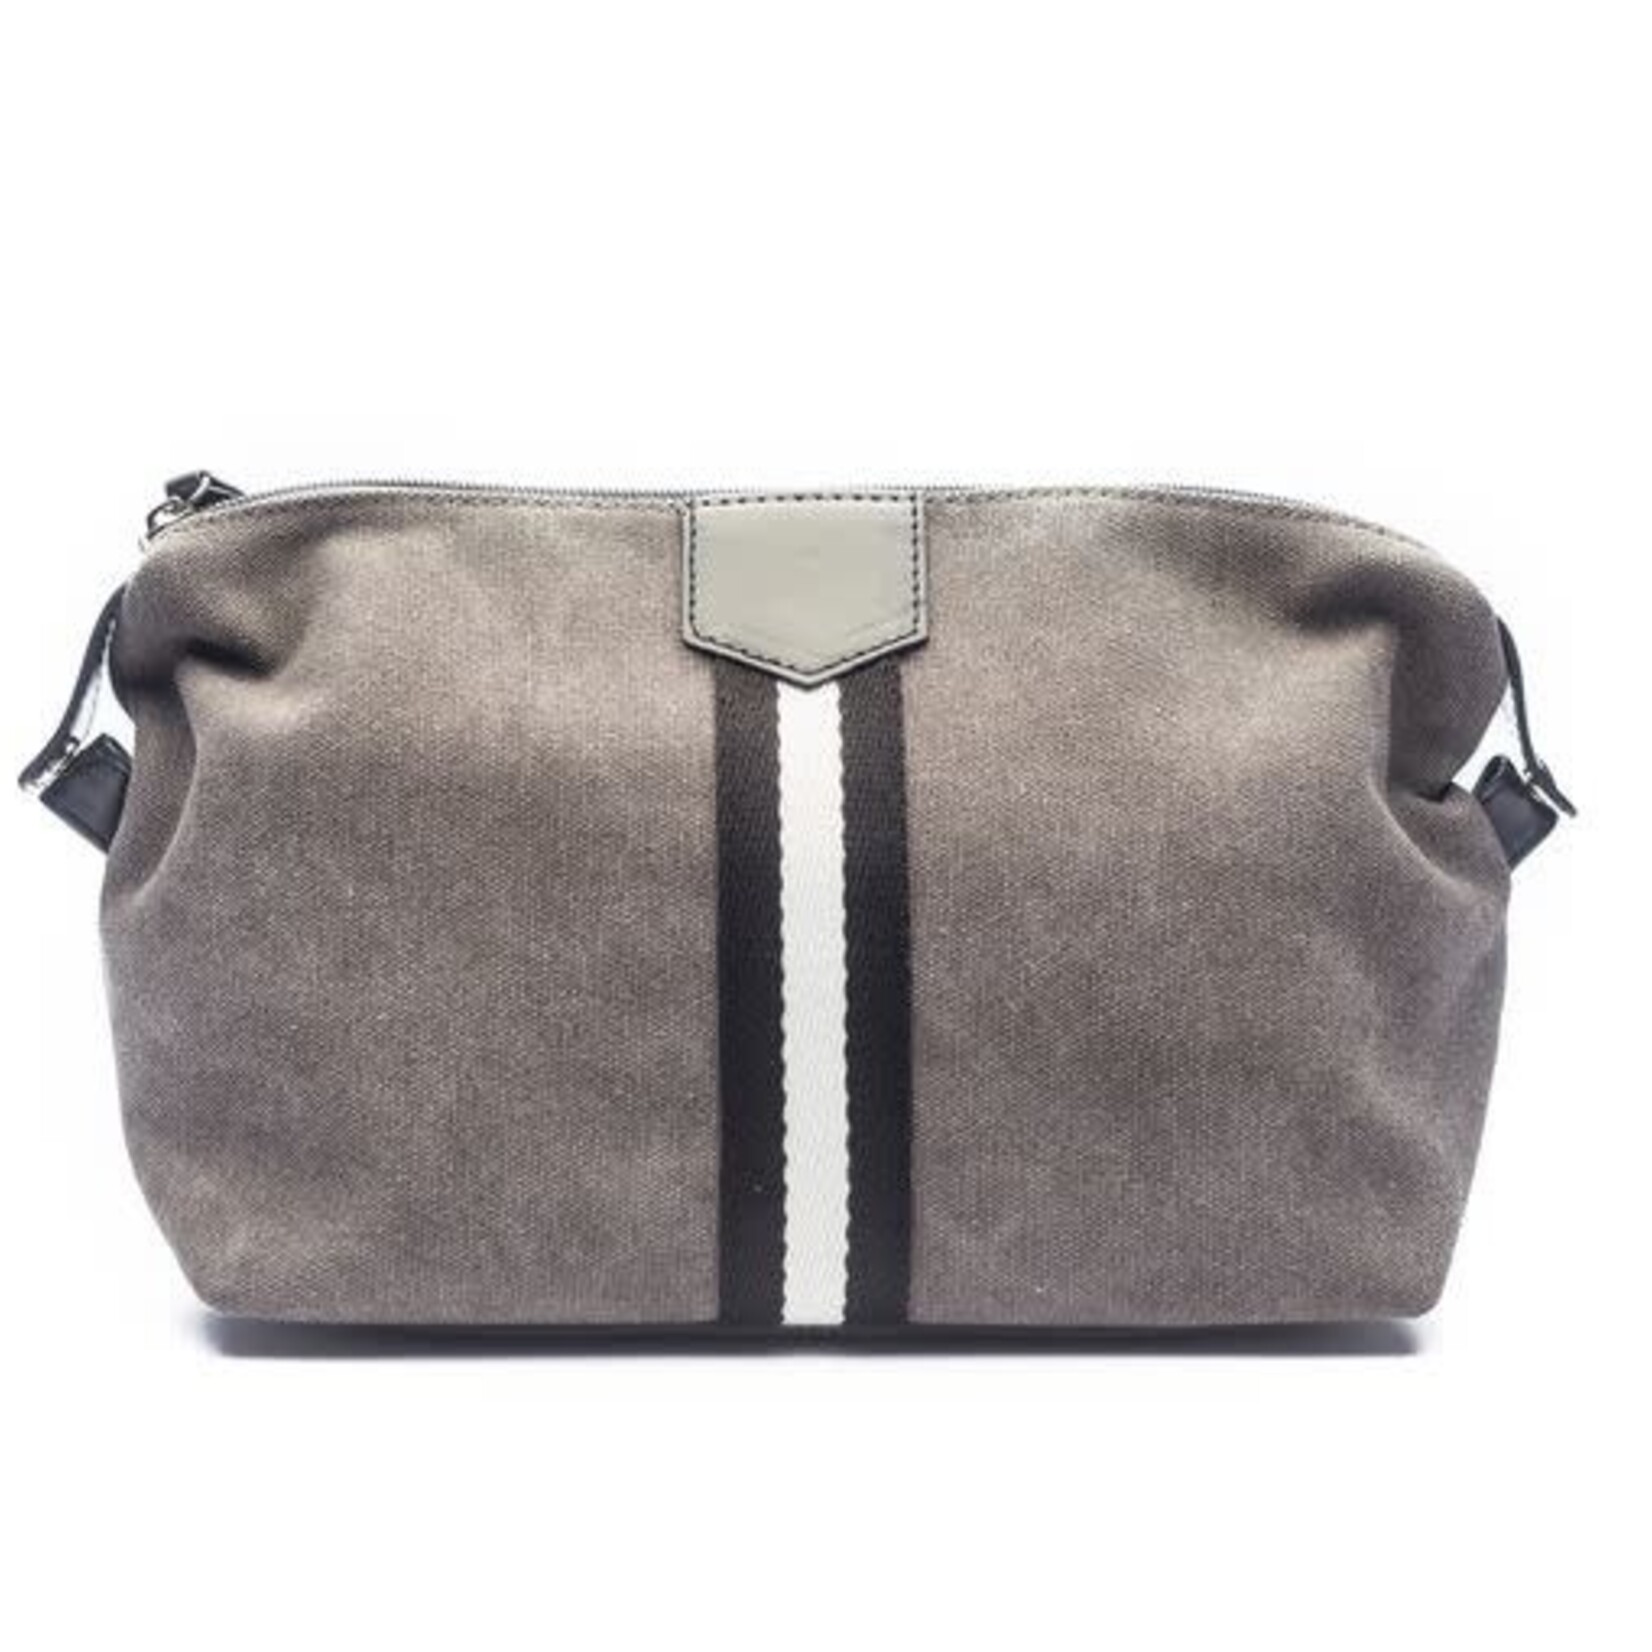 Brouk & Co Brouk Original Toiletry Bag - grey with black and white stripes